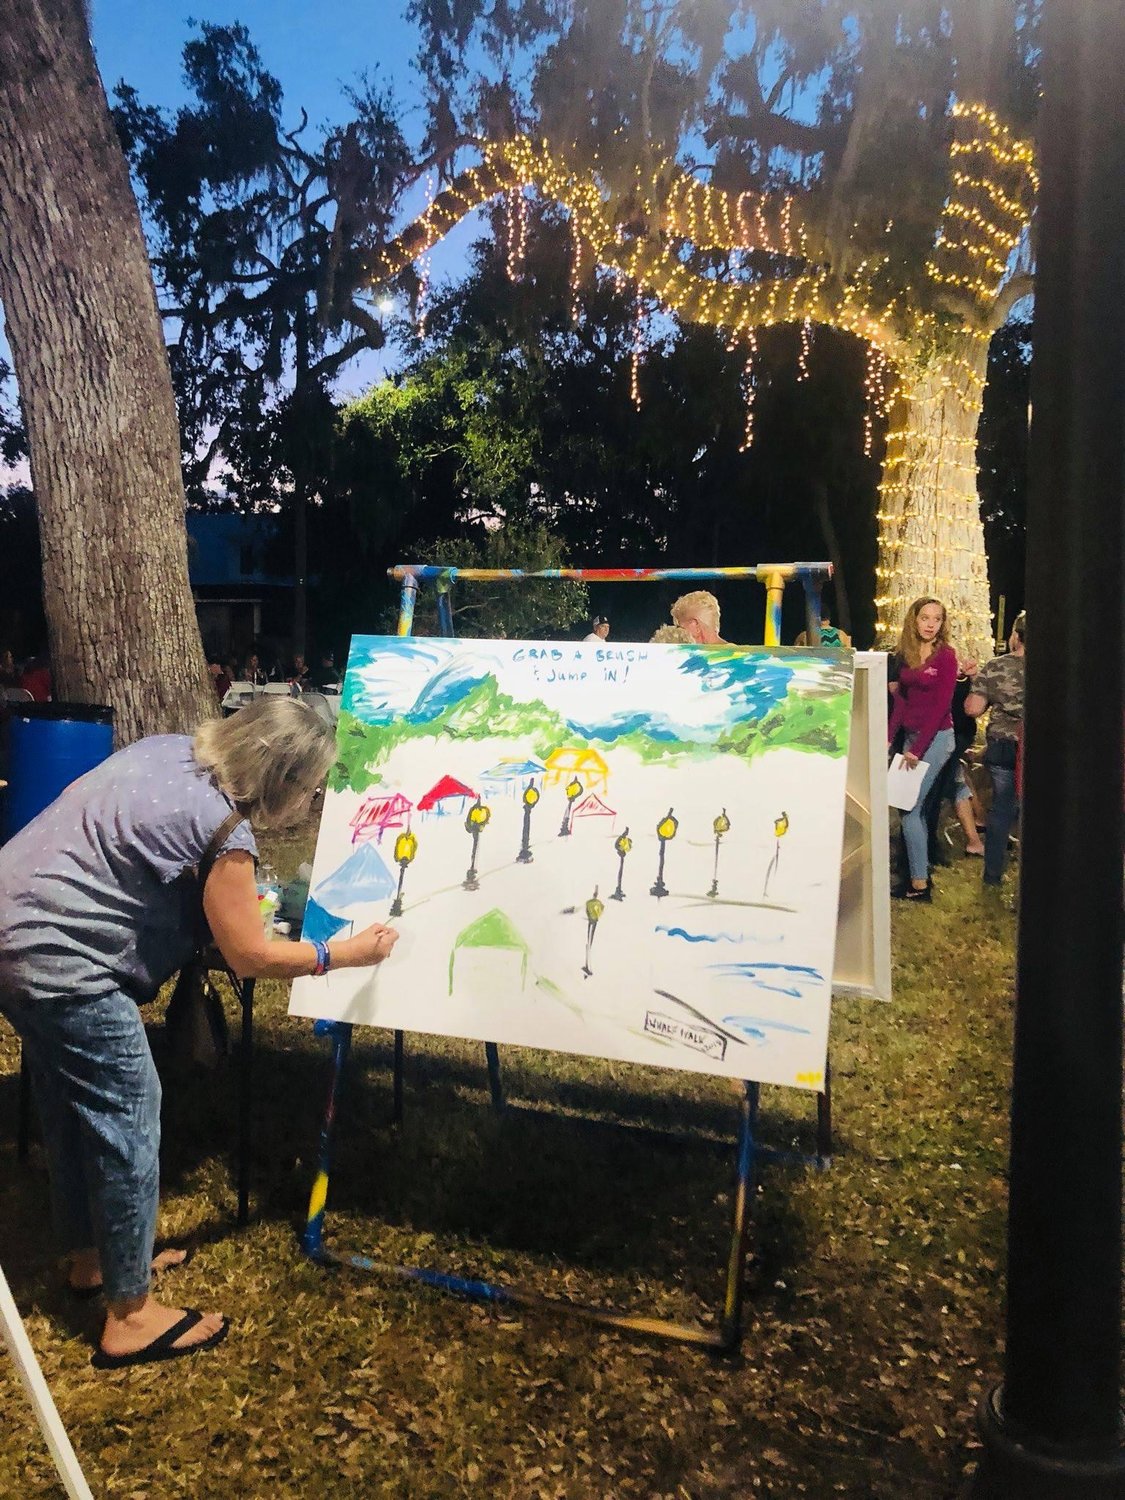 Wharf Walk, in years past, has been filled with interactive art activities like this community painting.